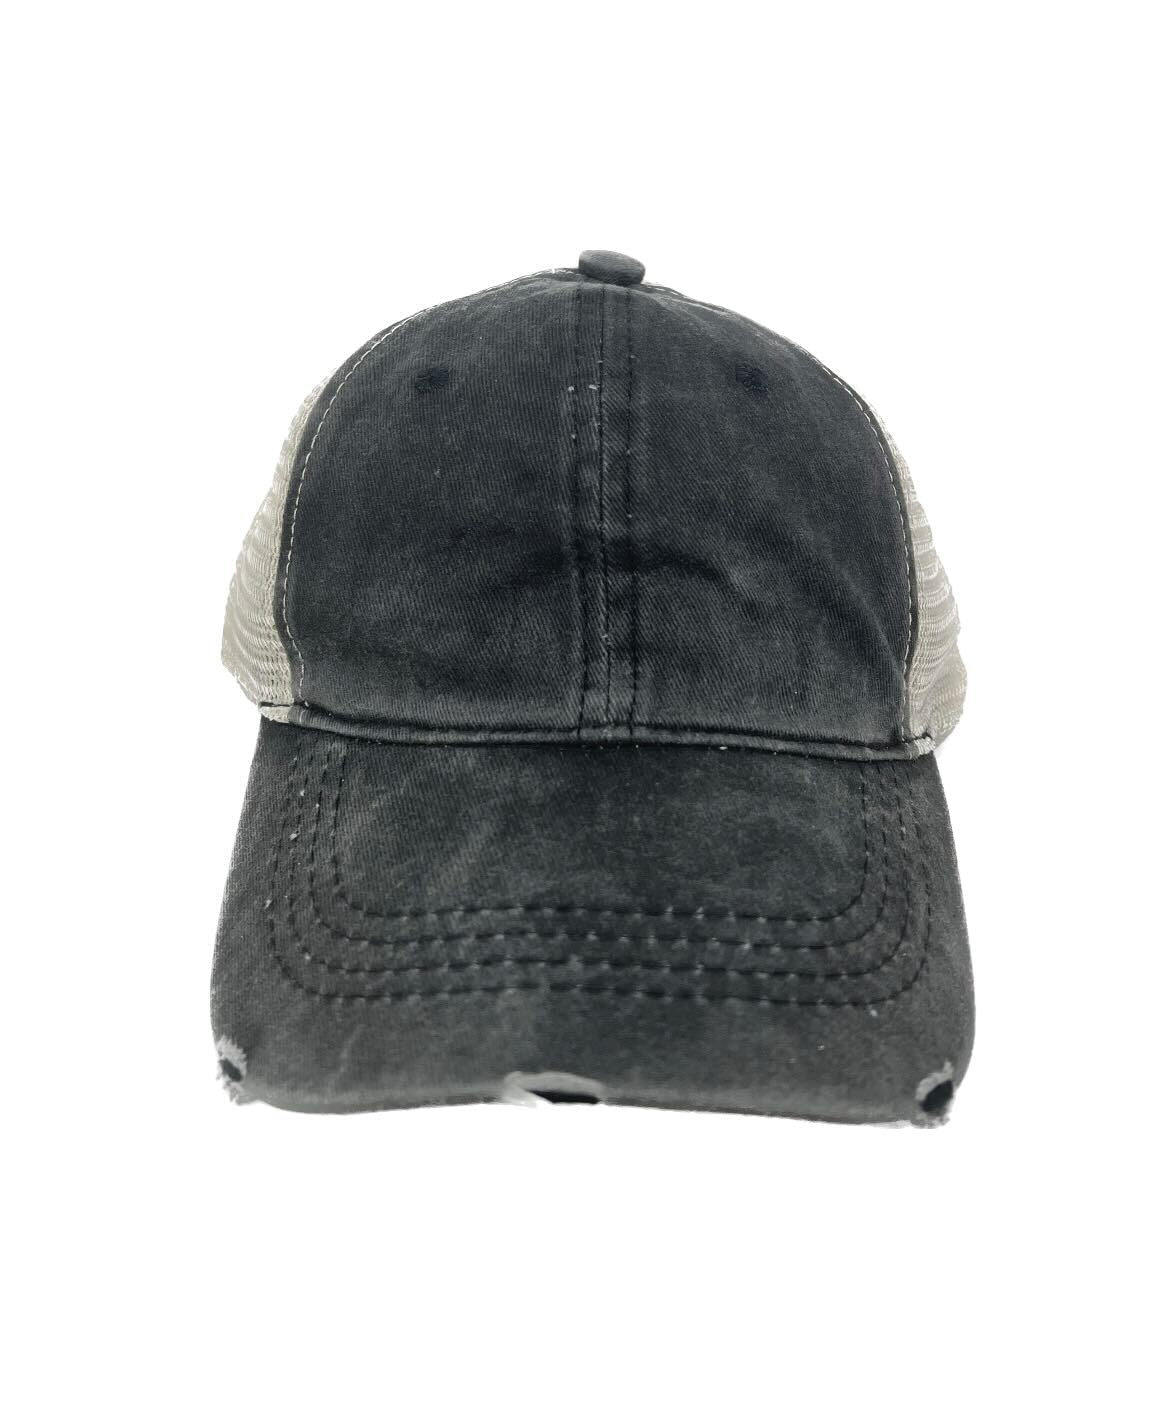 GIRLS High Ponytail Charcoal Hat with Beige Mesh